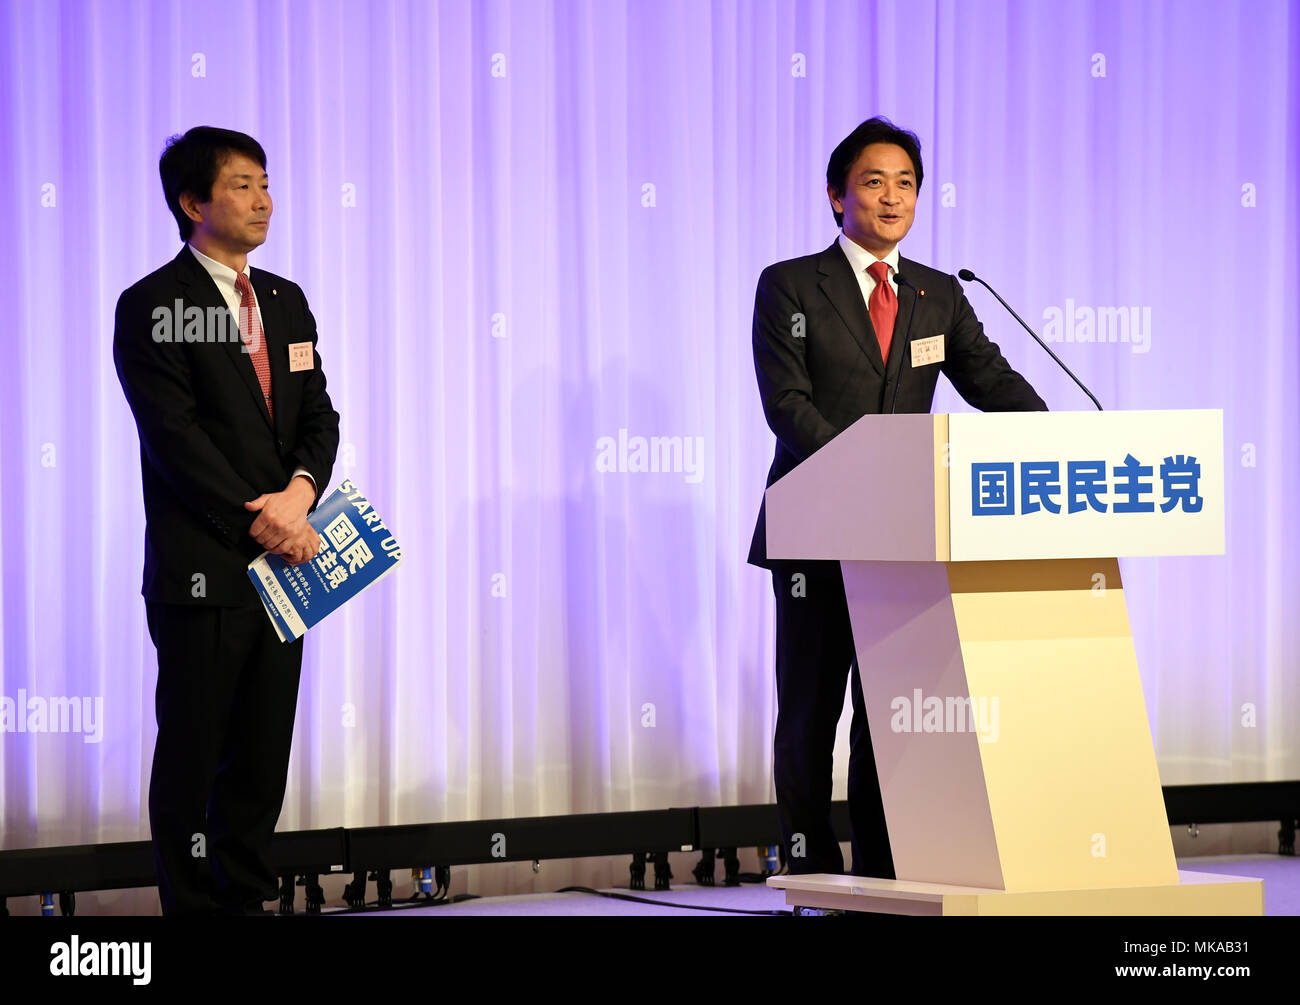 Tokyo, Japan. 7th May, 2018. Yuichiro Tamaki (R), a lower house member who led the Party of Hope, speaks during the new party's inauguration ceremony in Tokyo, Japan, May 7, 2018. The now-obsolete opposition Democratic Party of Japan and the Party of Hope joined forces again Monday under the new single party name Democratic Party for the People. Credit: Ma Ping/Xinhua/Alamy Live News Stock Photo